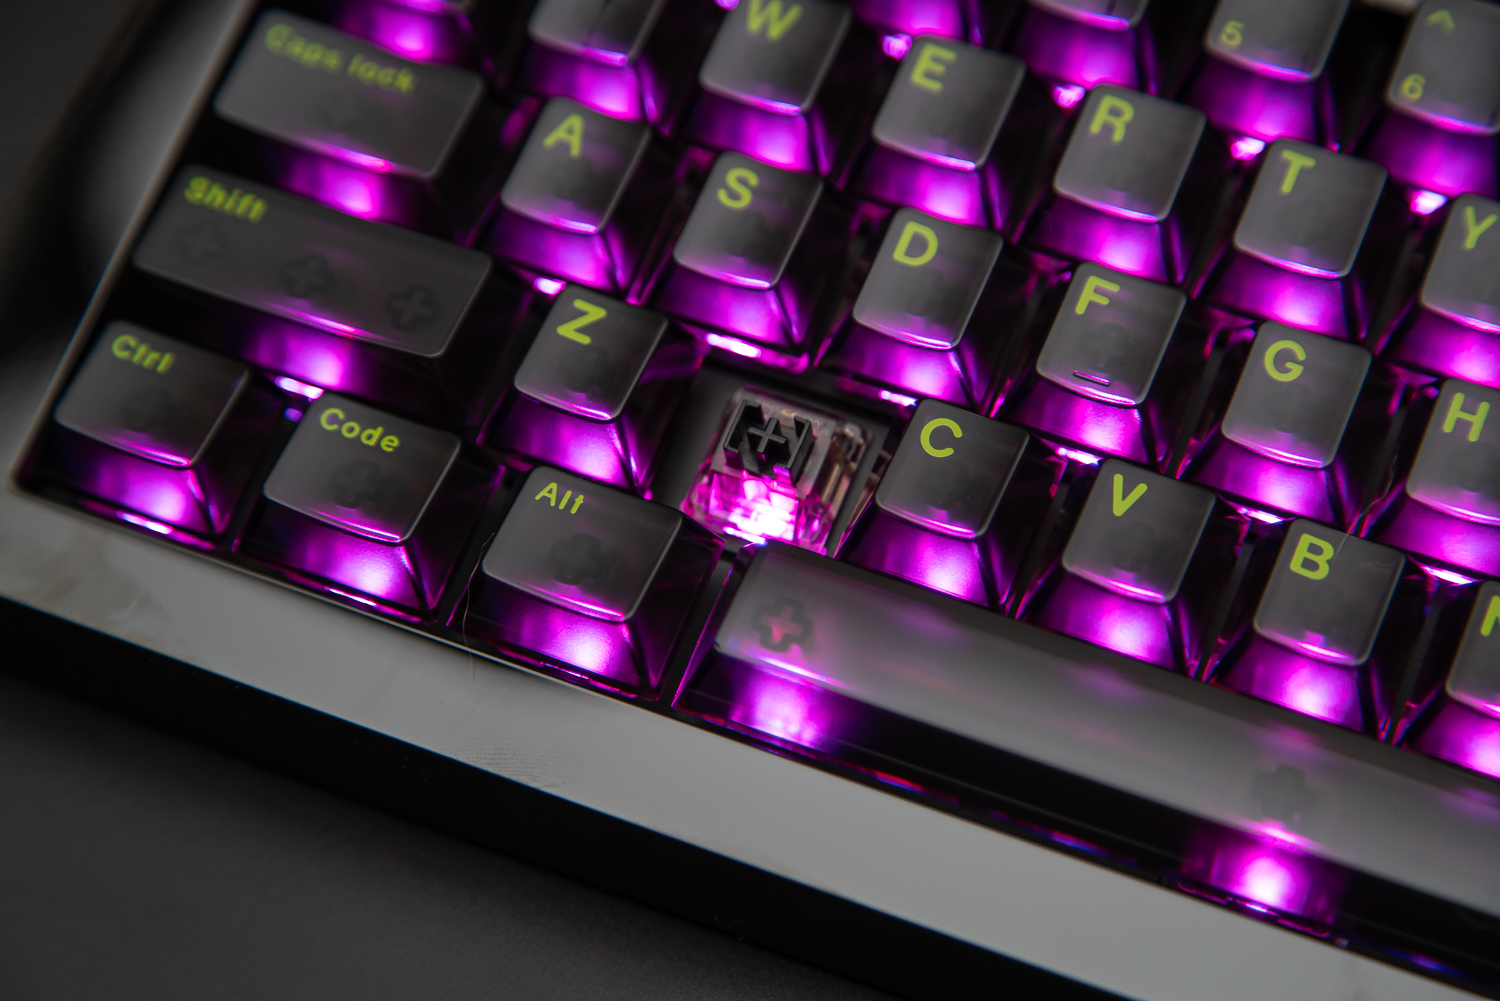 Cyberboard R2 review: Should you spend $700 on a keyboard 